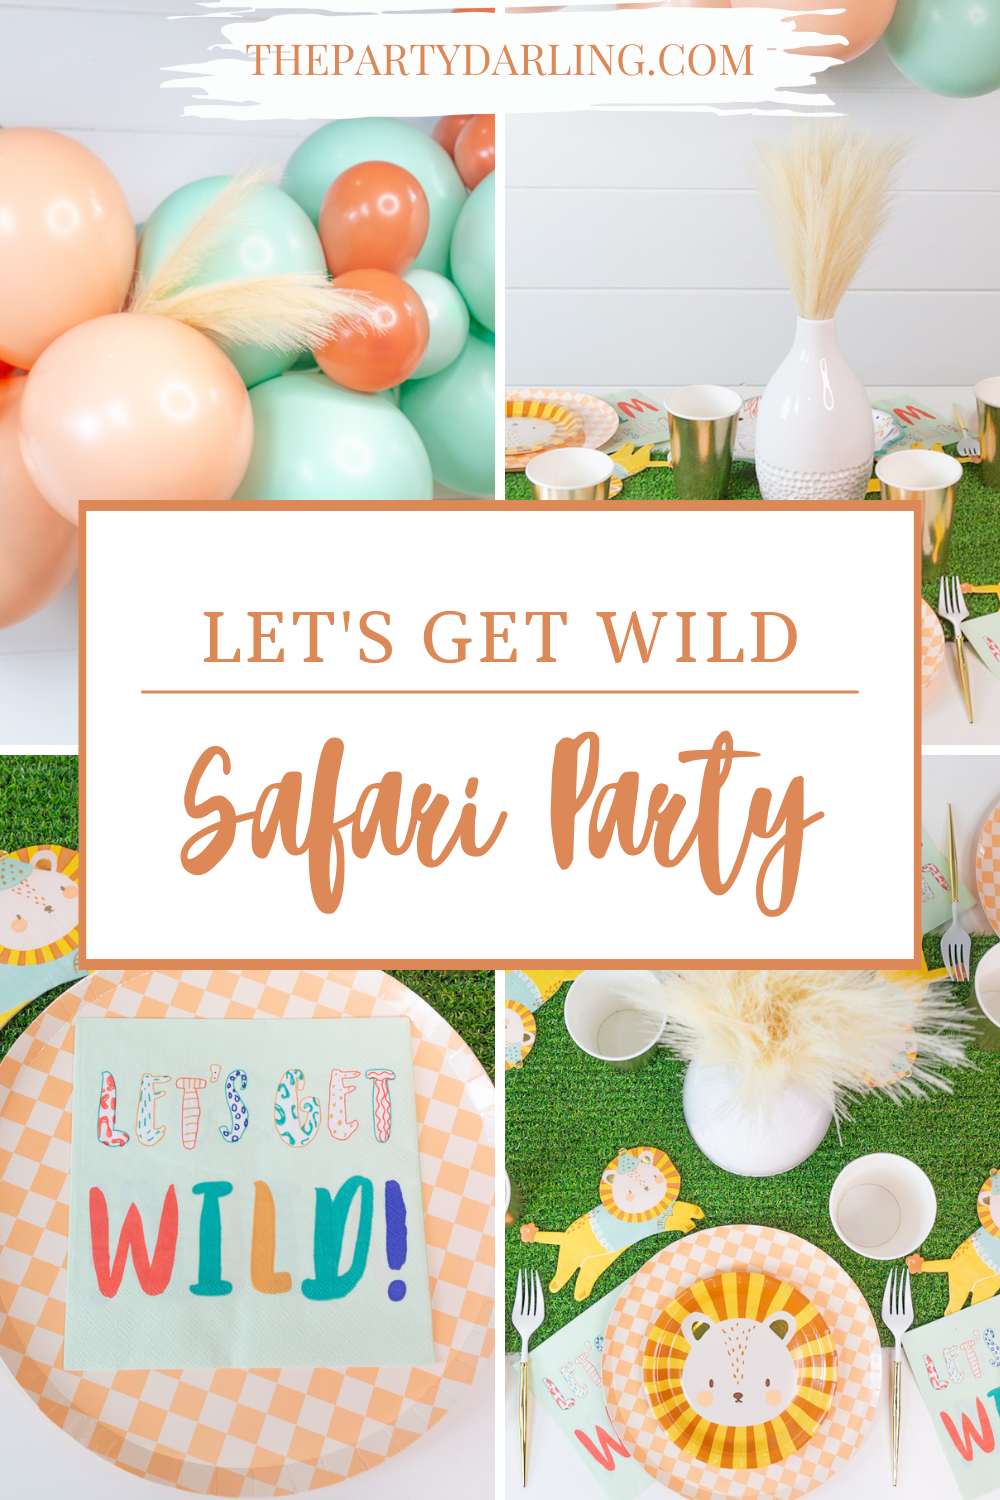 Let's Get Wild Safari Party | The Party Darling